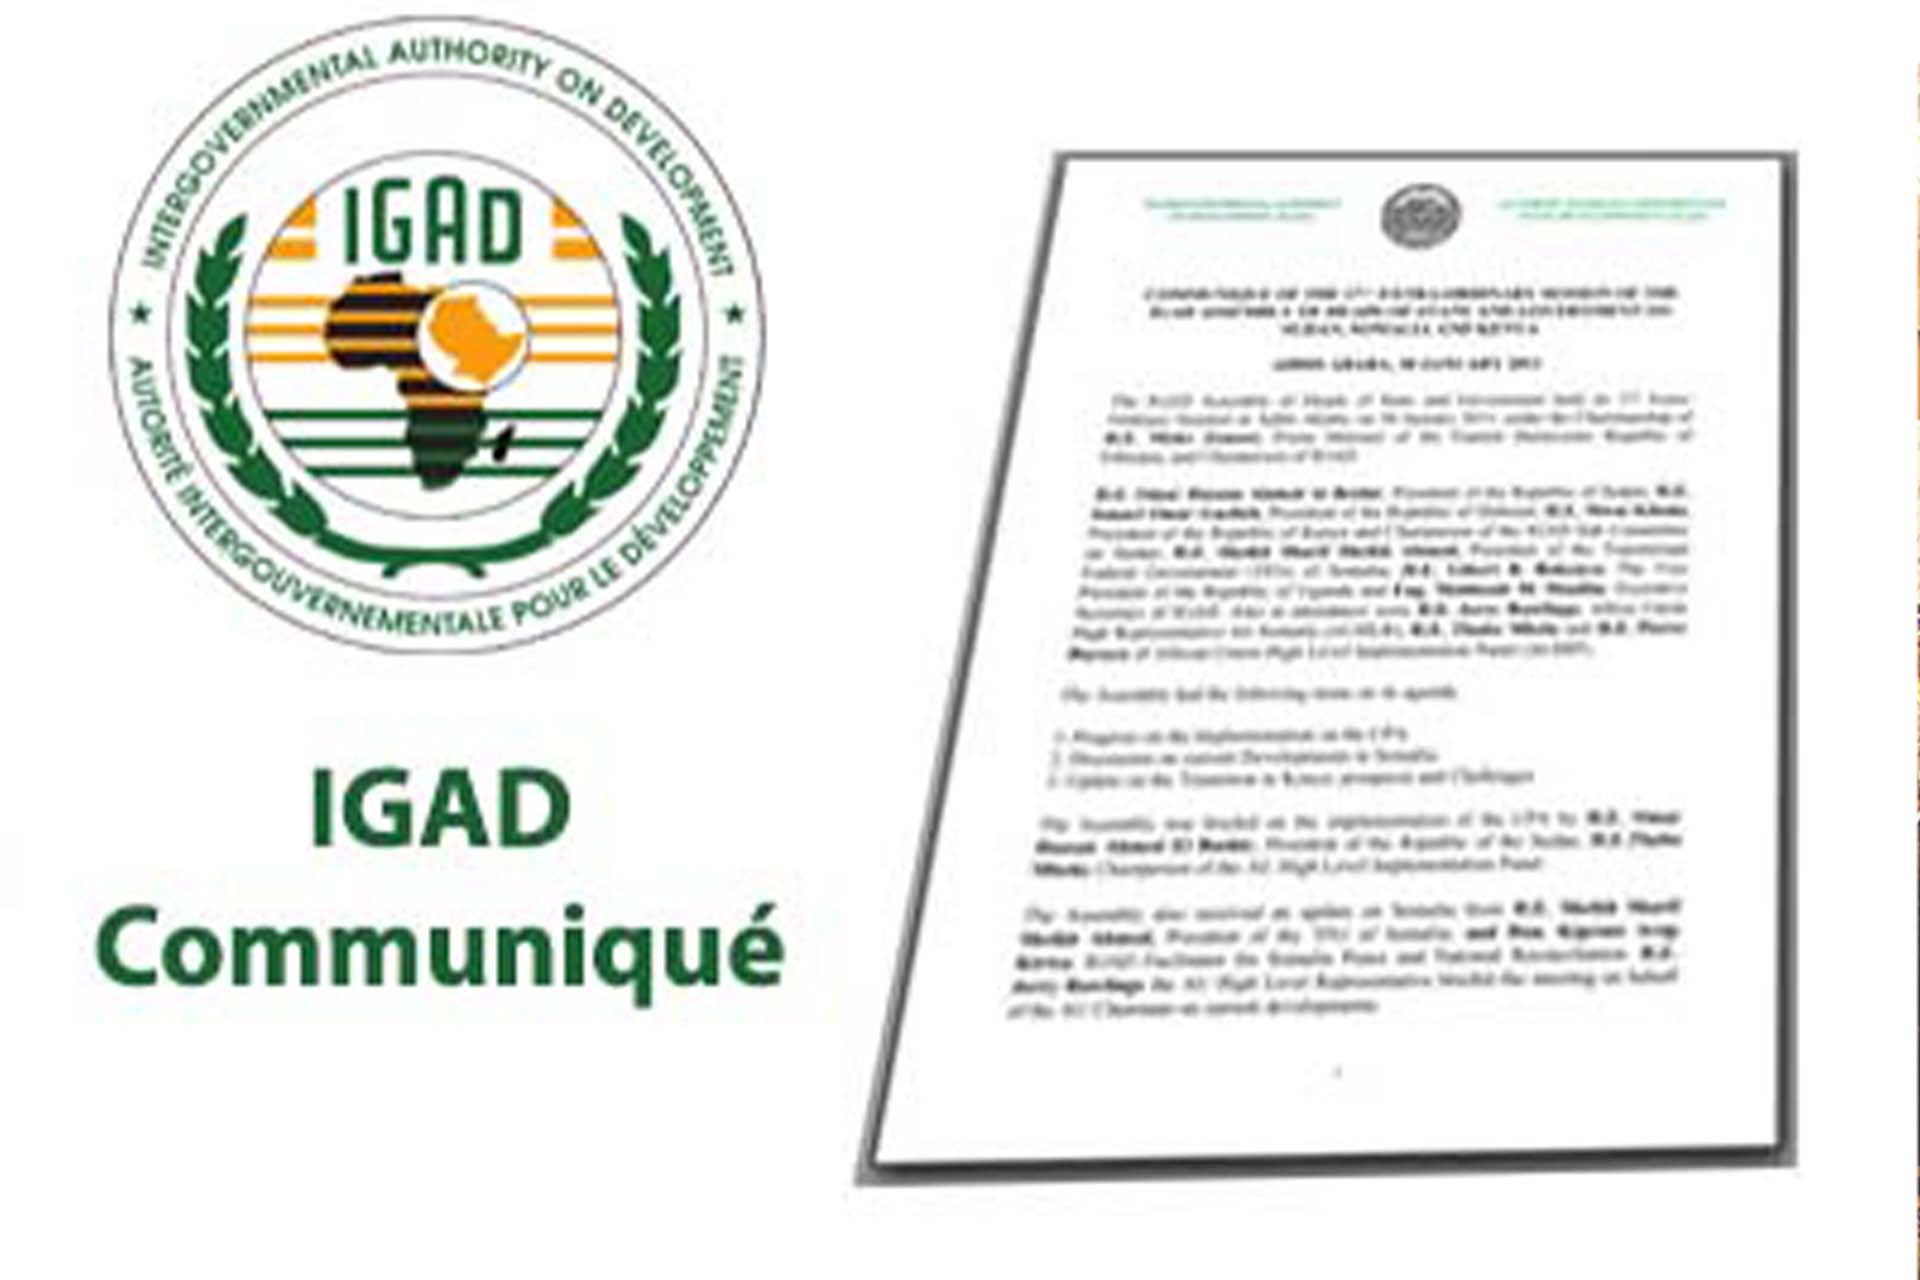 Communique of the 22nd IGAD Extra-ordinary Summit of Heads of States